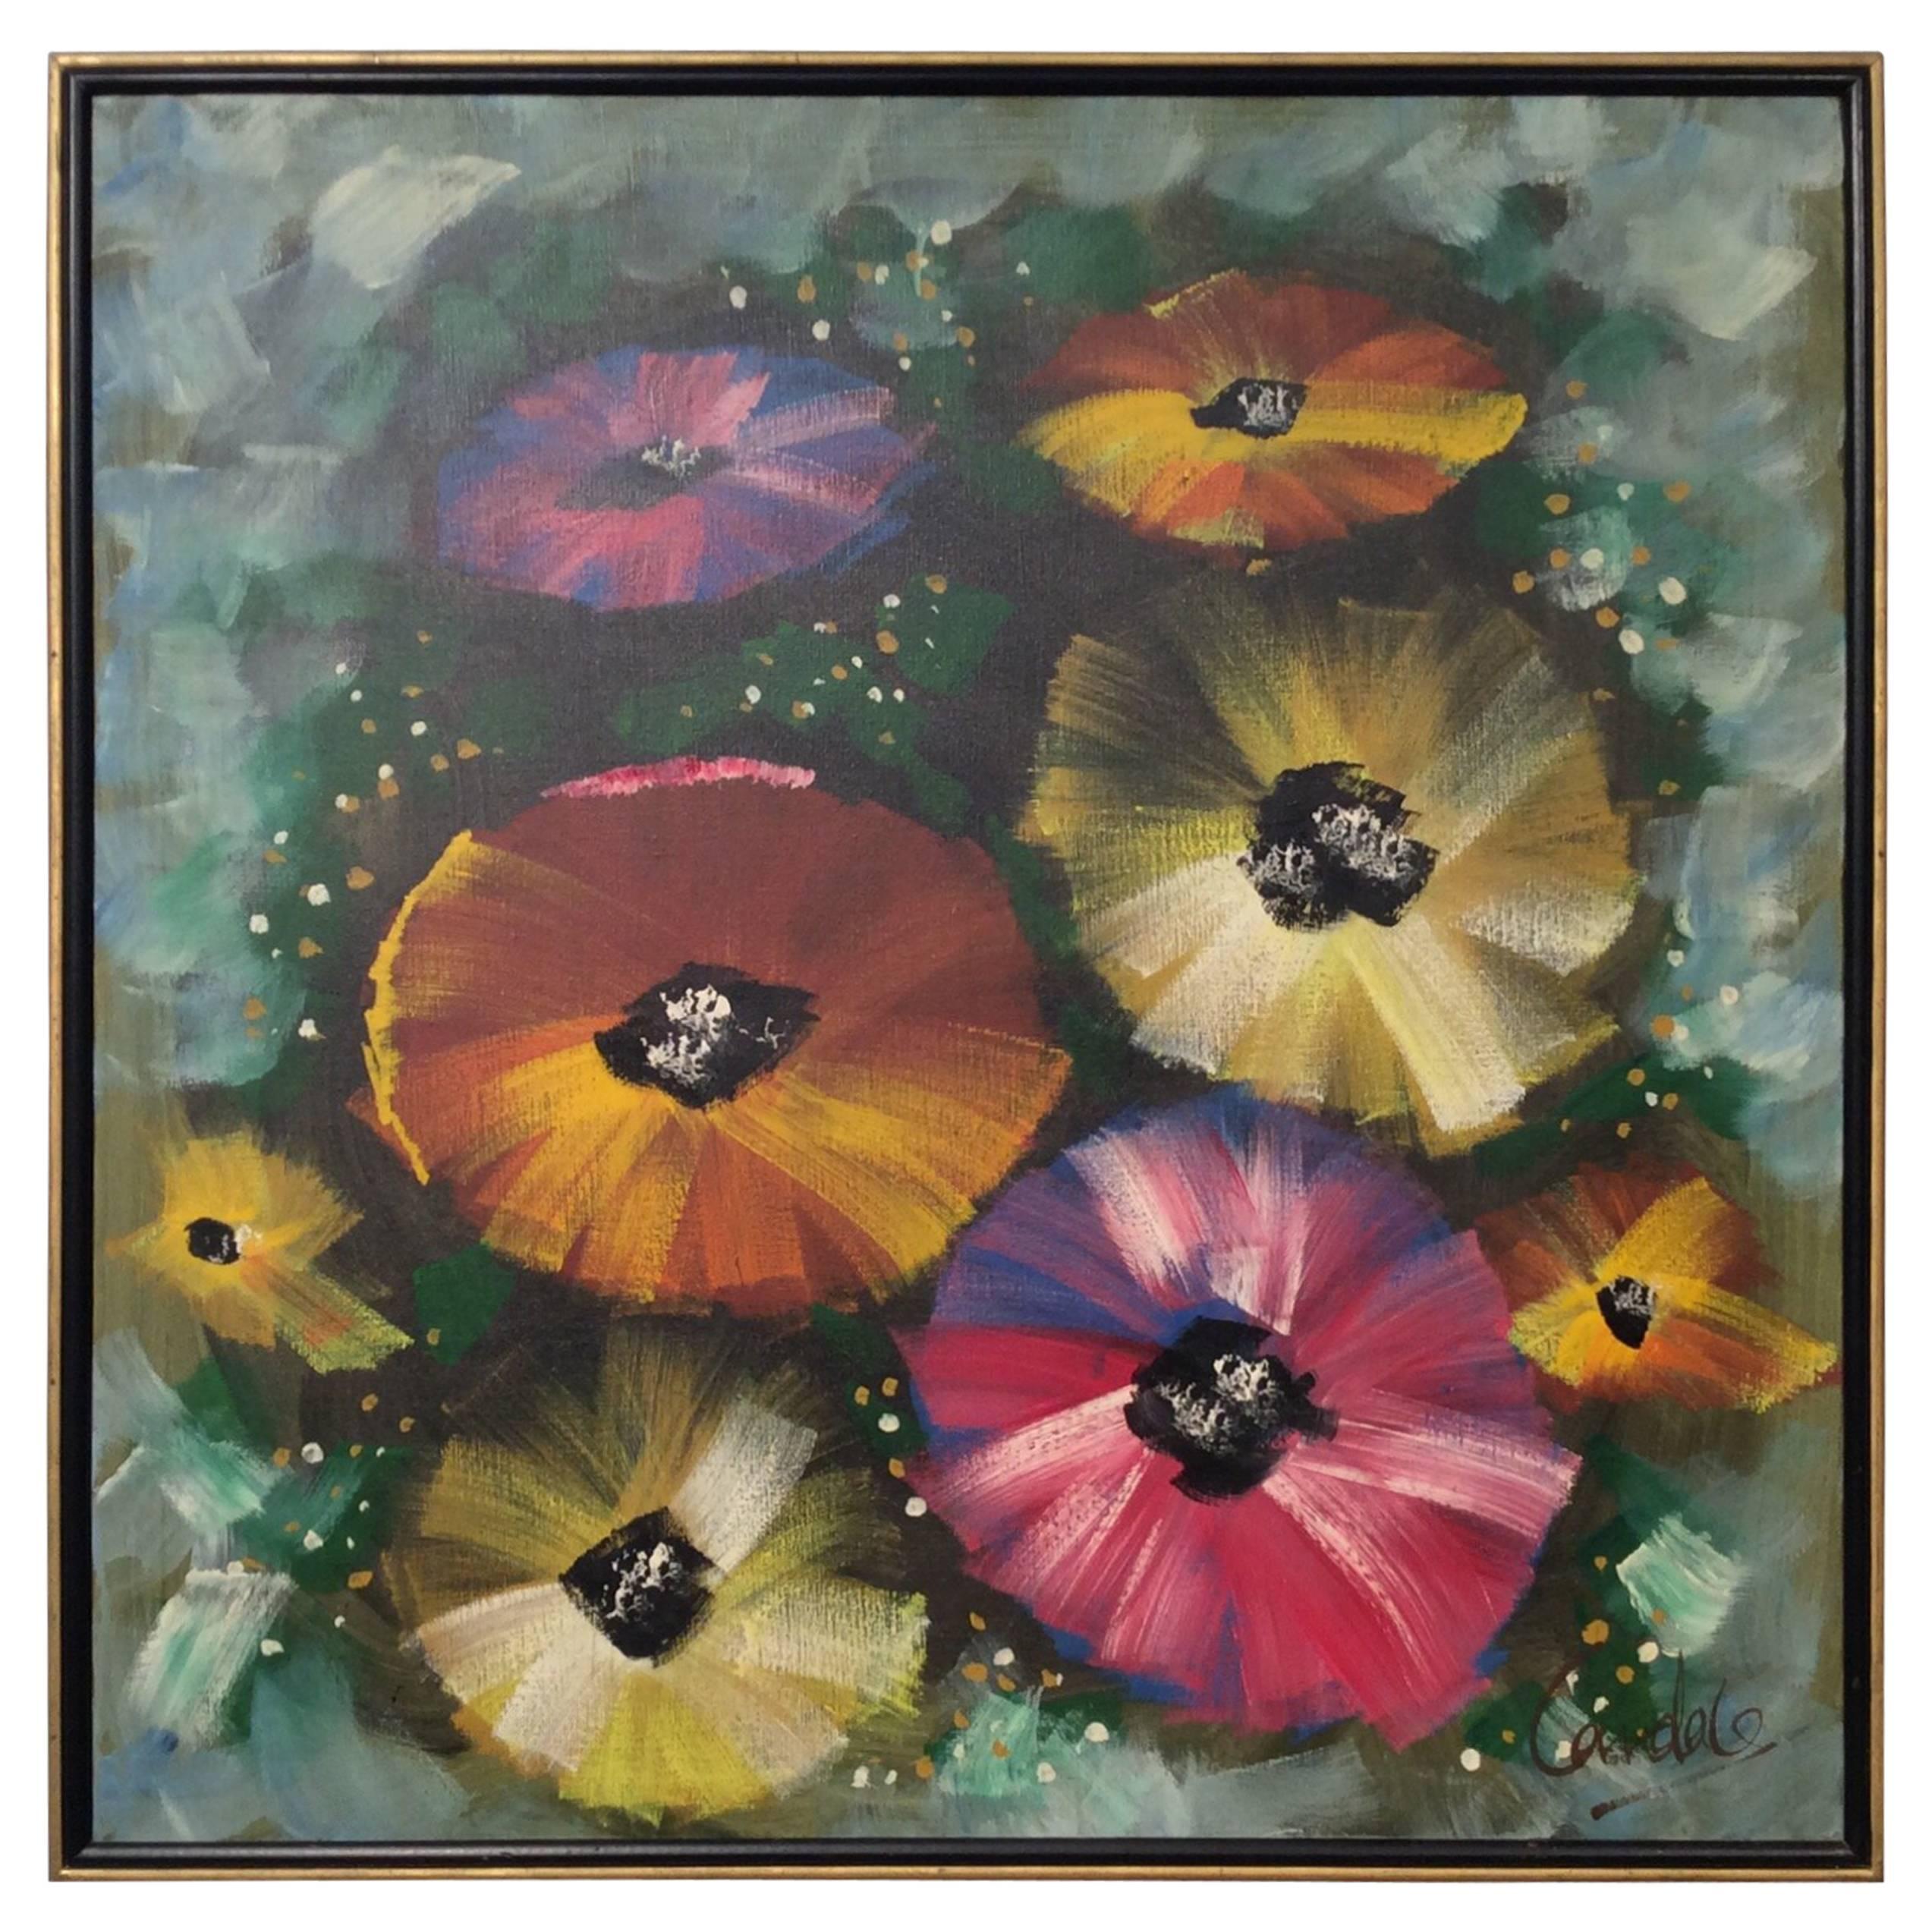 Midcentury Abstract Art on Canvas Depicting Pansies